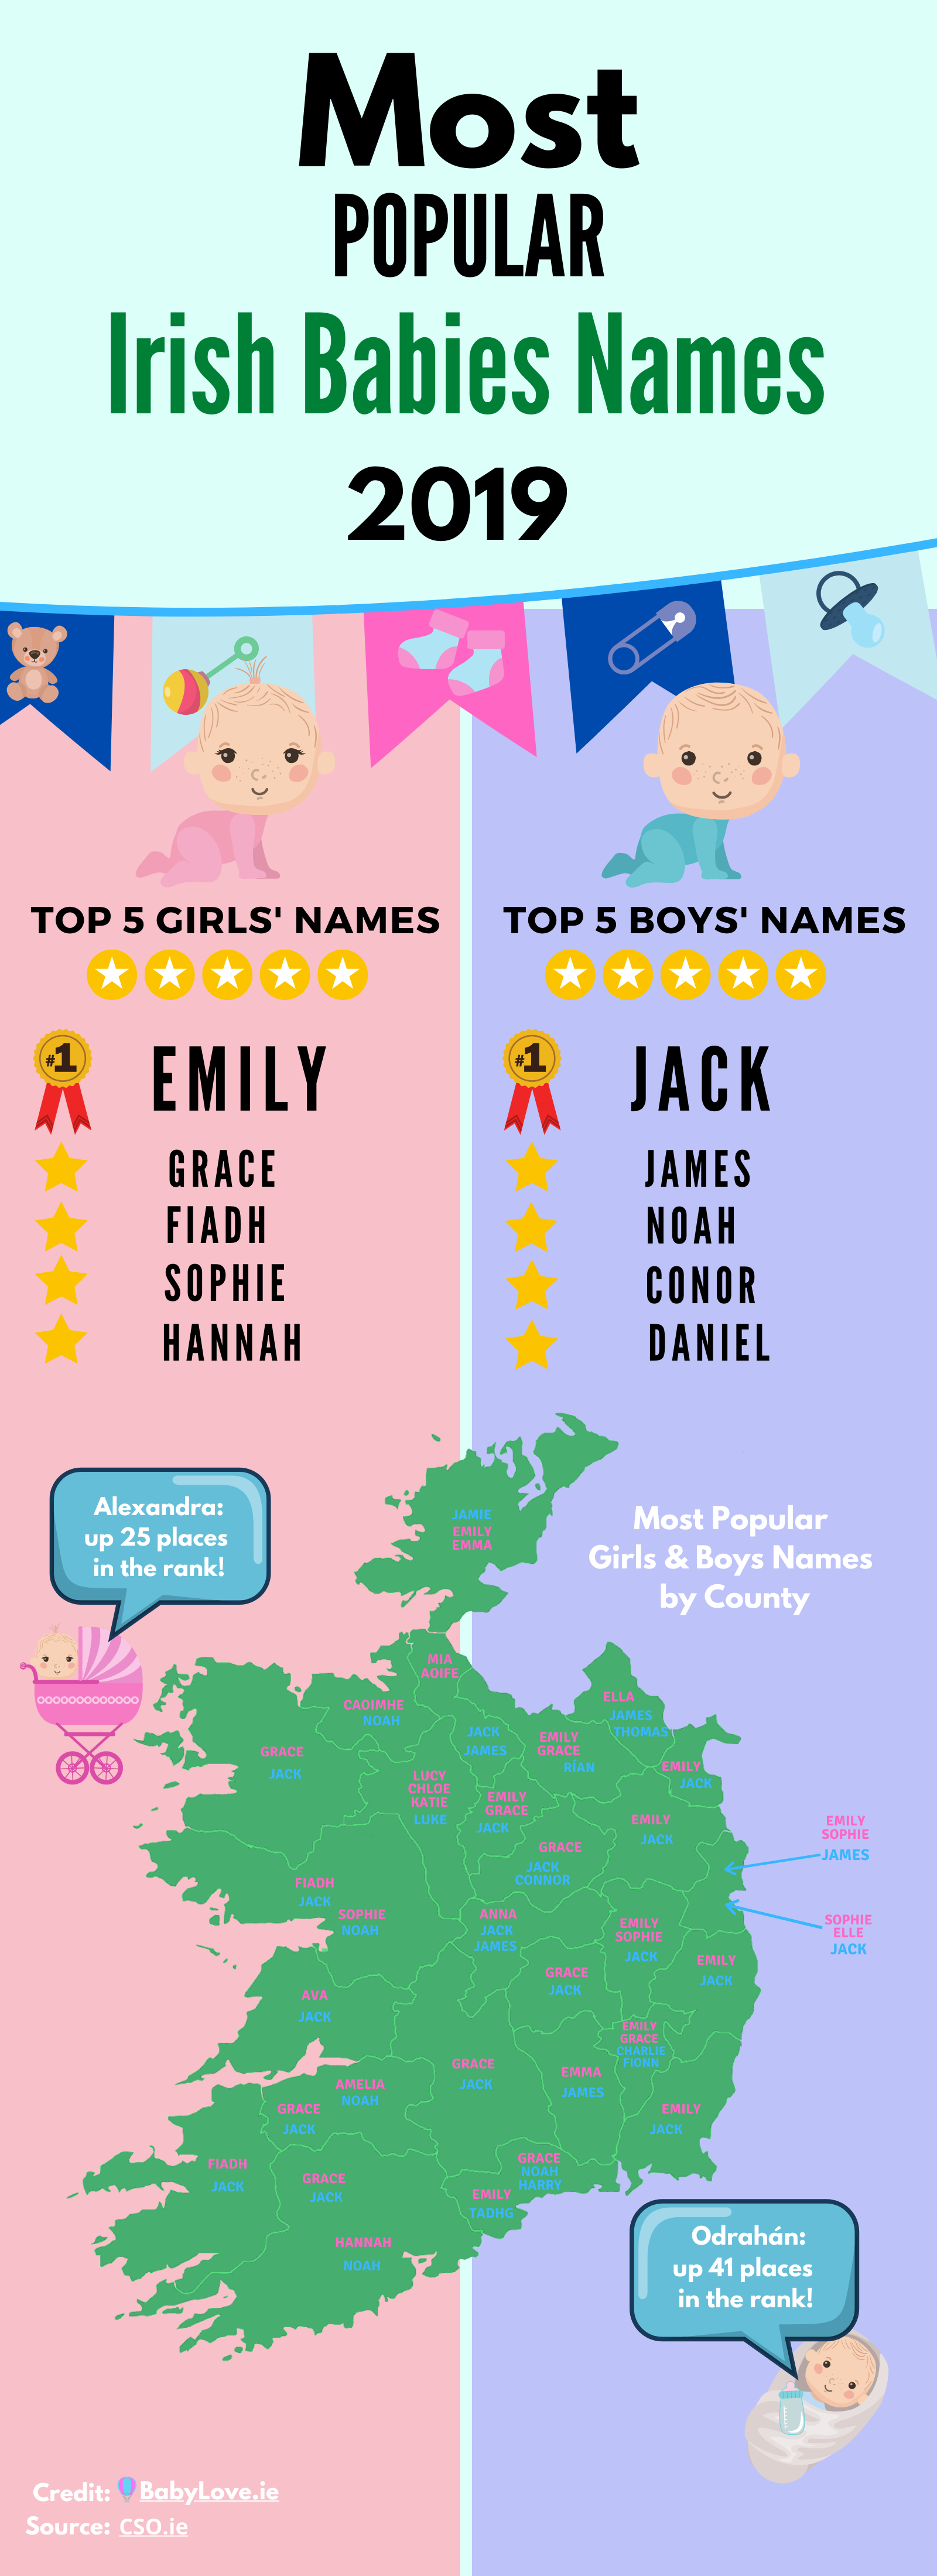 infographic presenting data on most popular names in Ireland in 2019